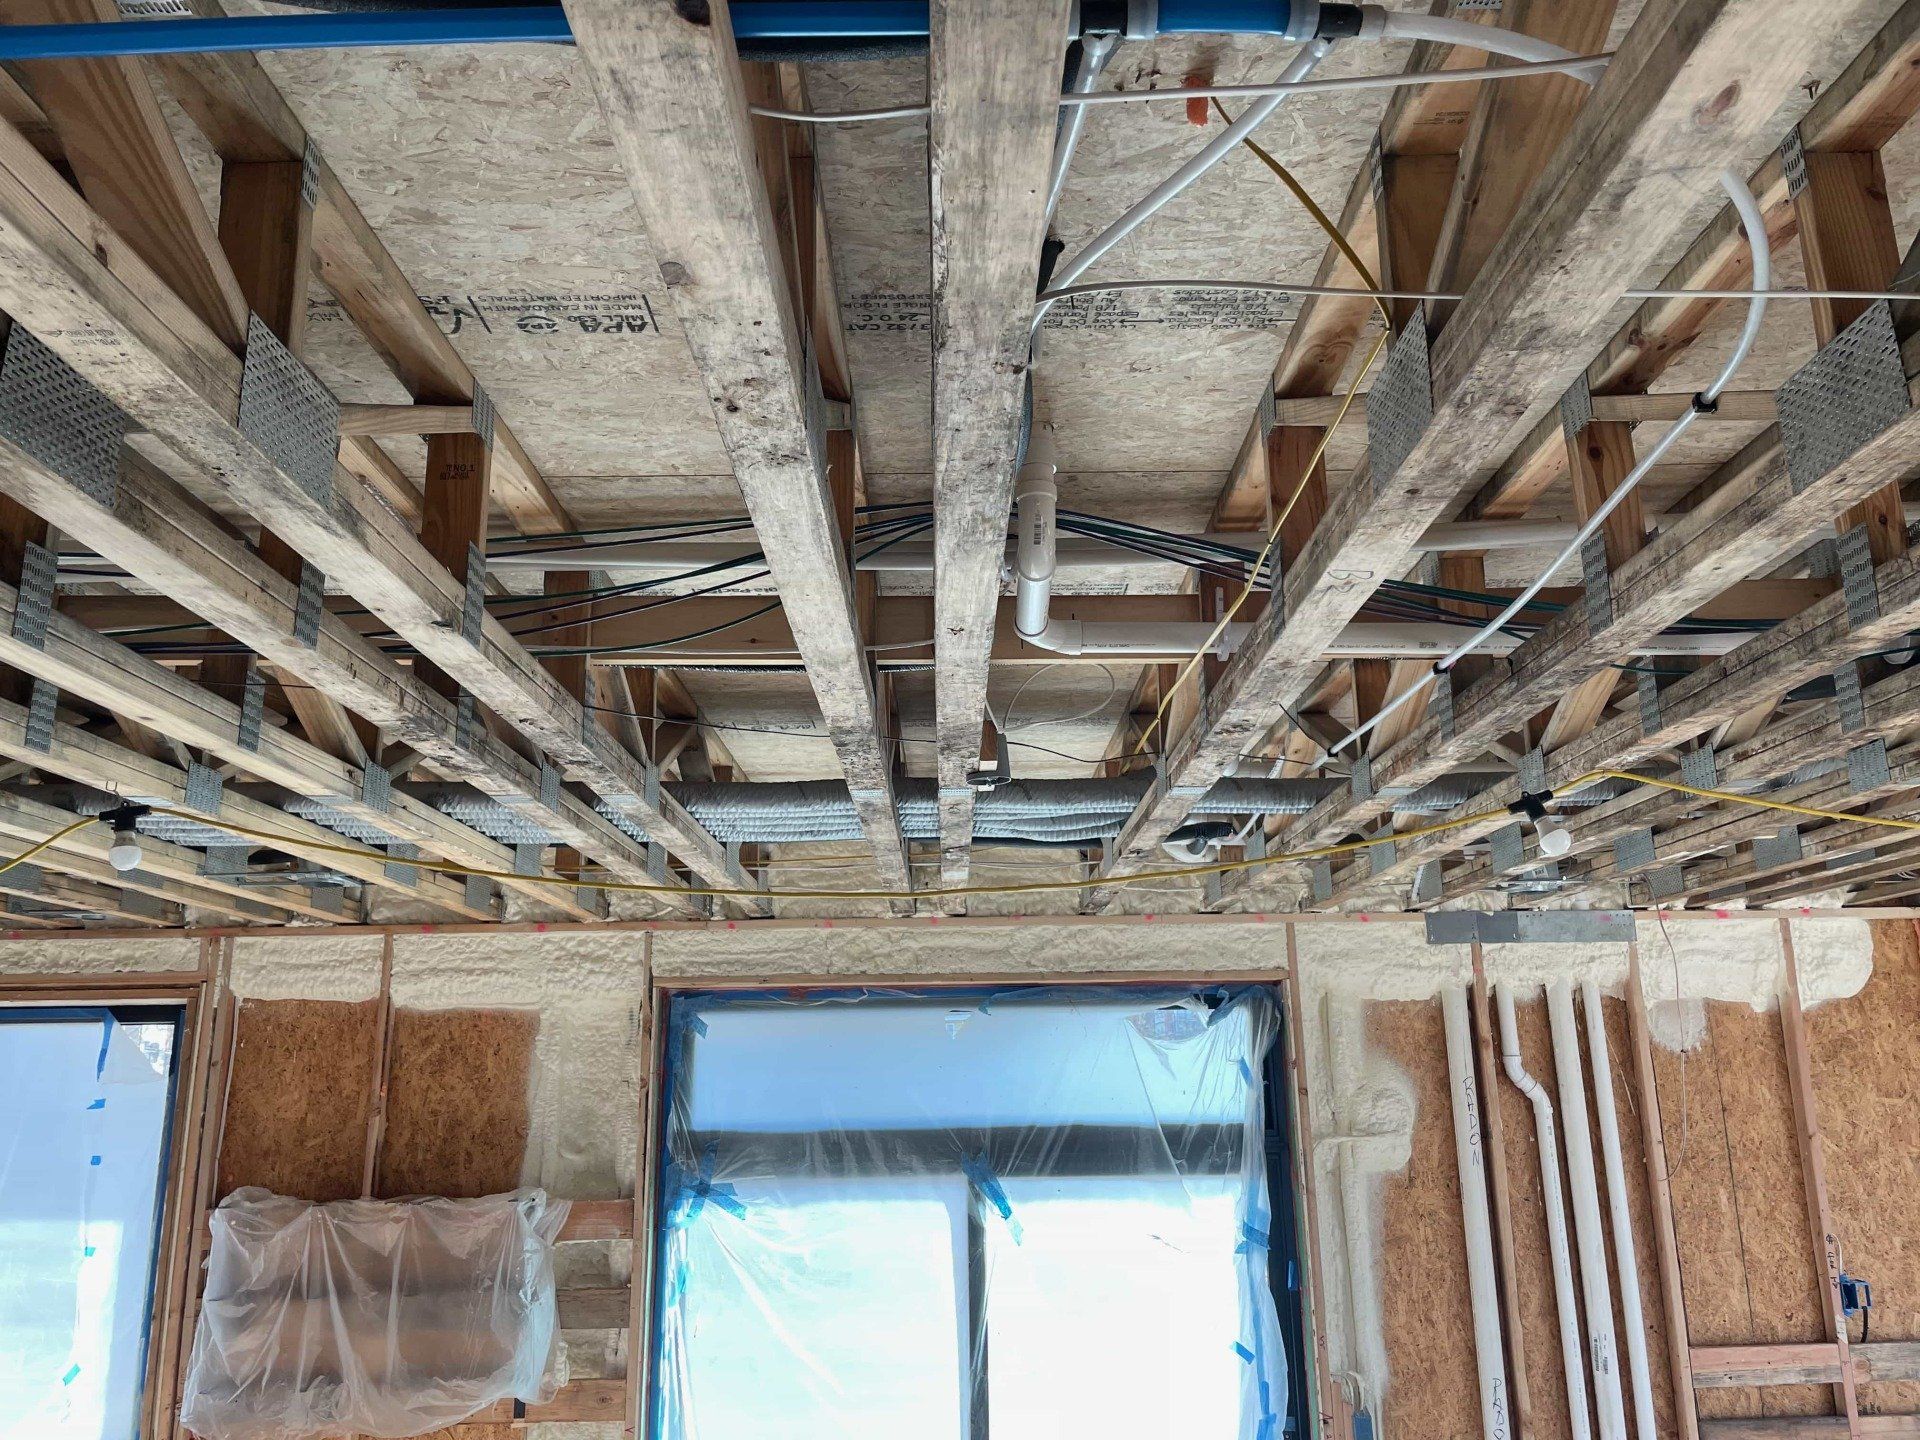 Closed cell spray foam insulation shown on the first floor of a home under construction